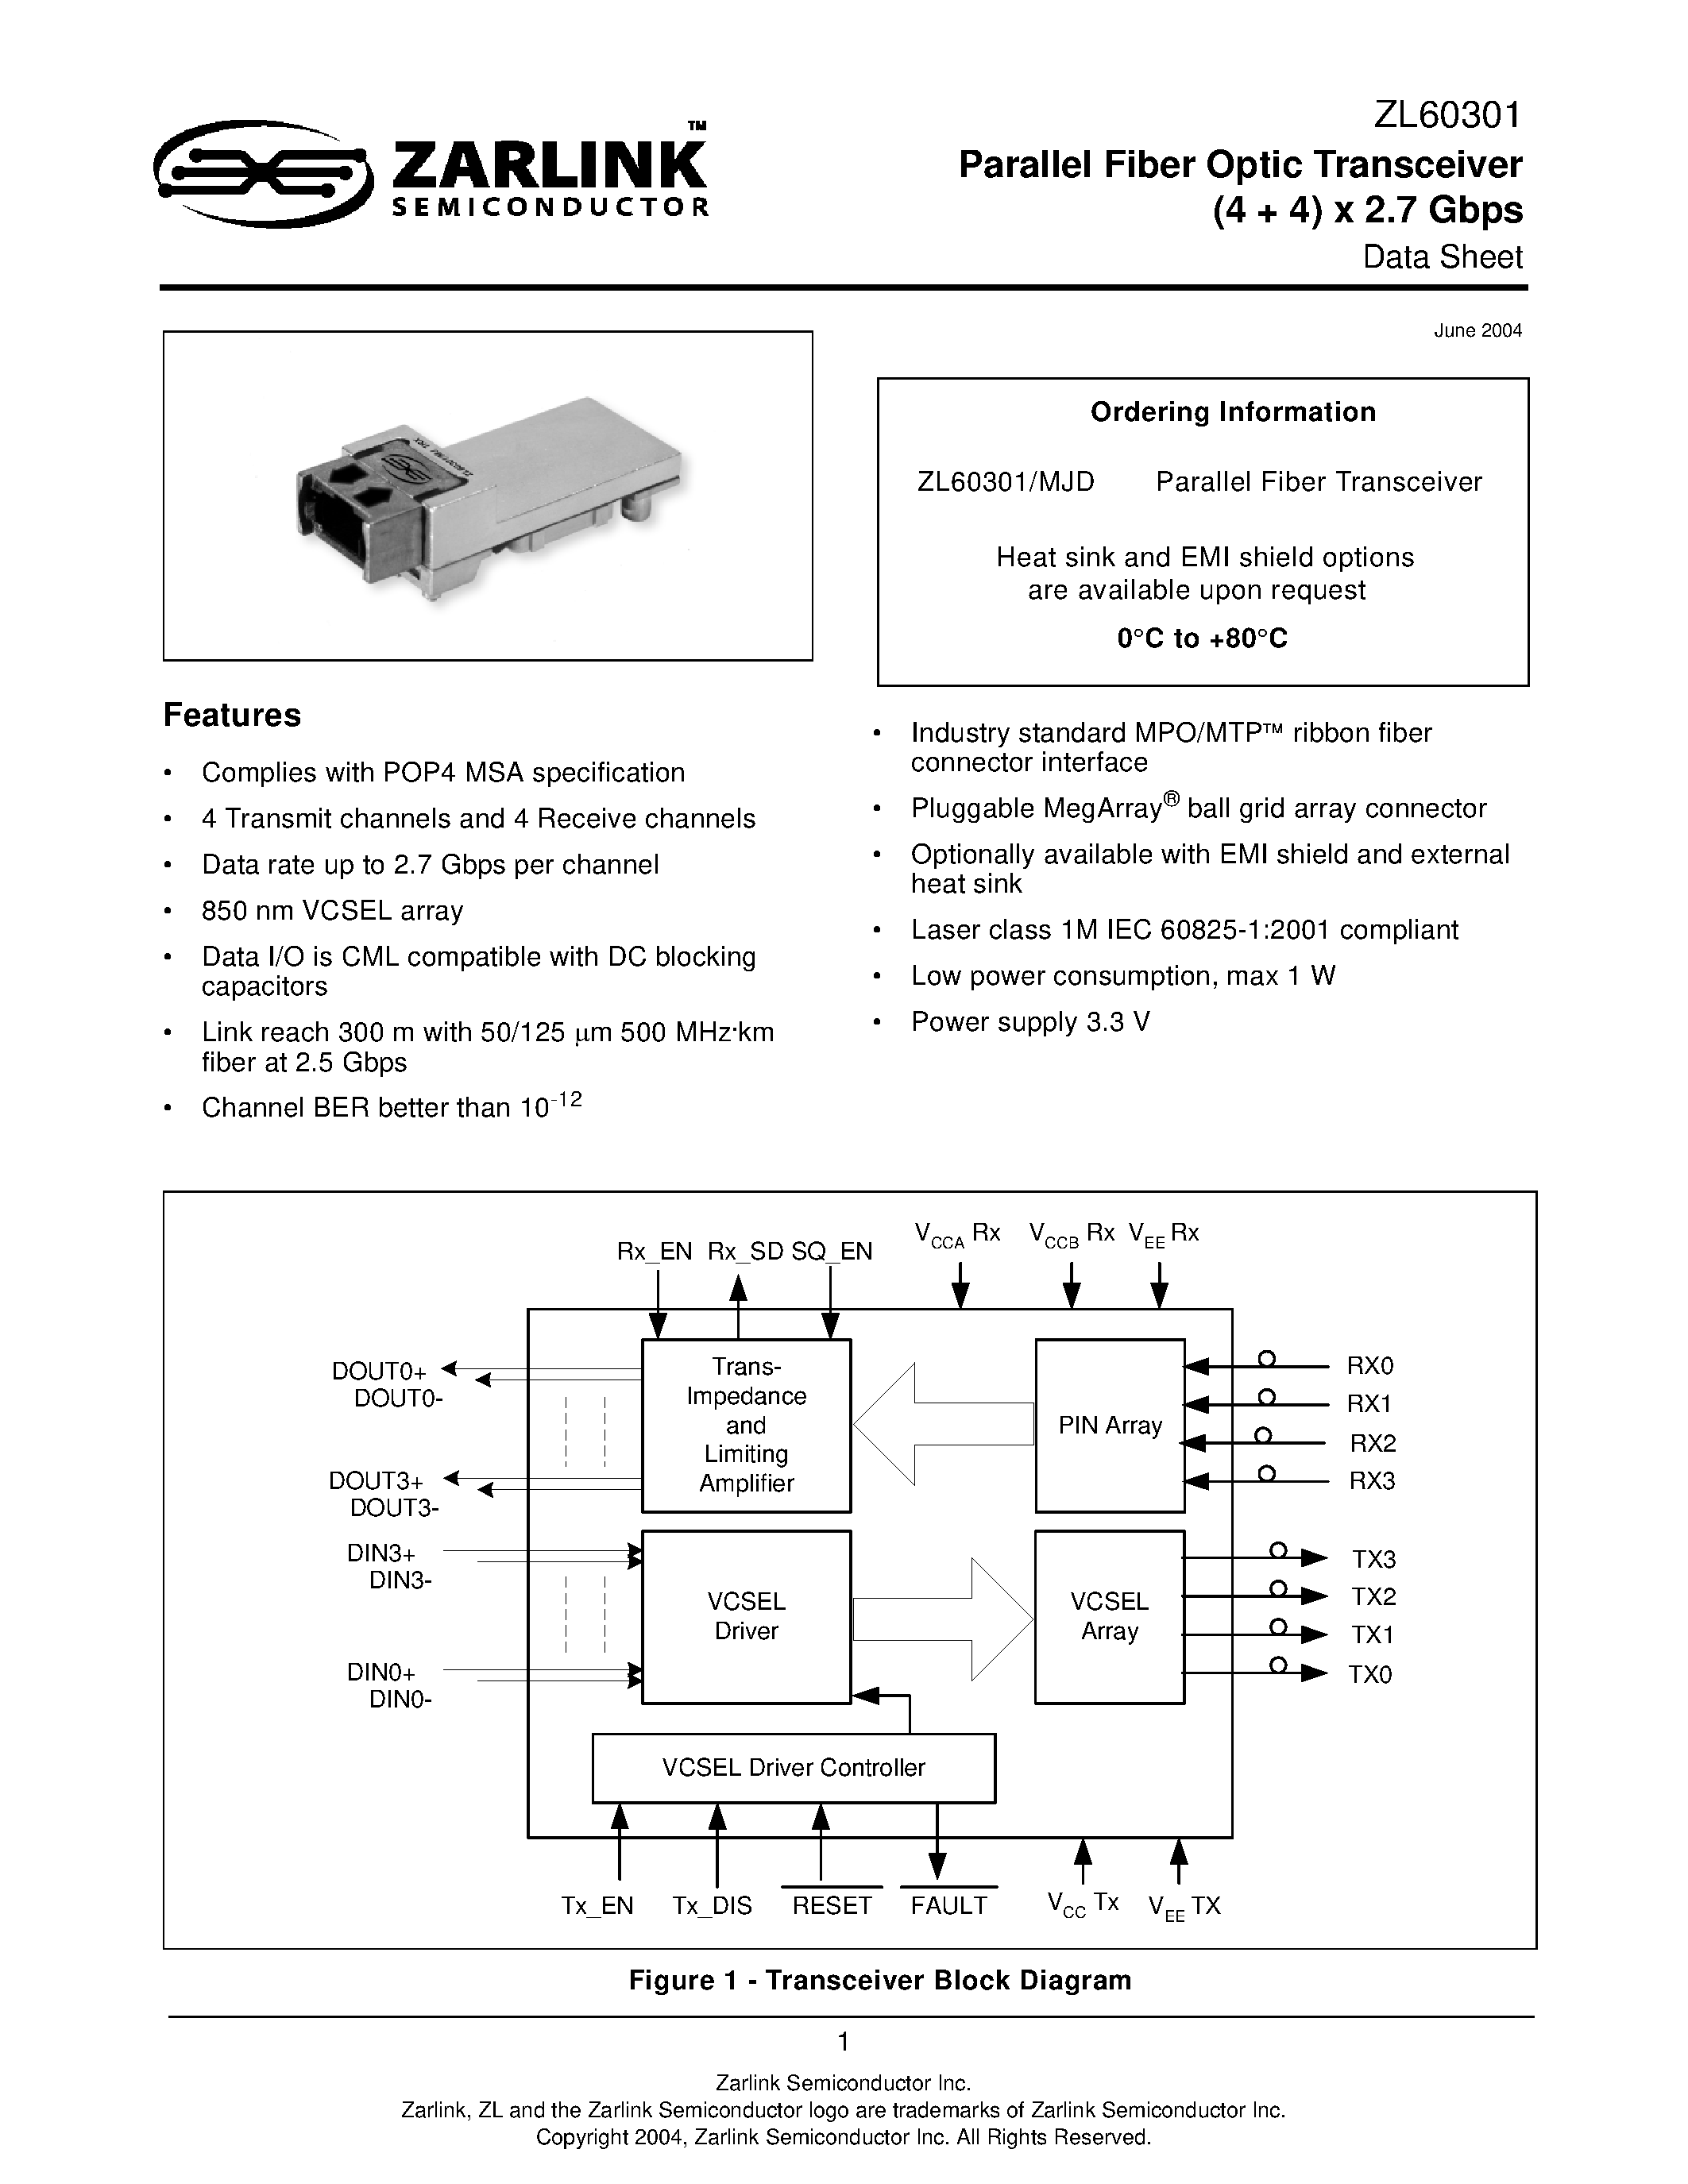 Datasheet ZL60301 - Parallel Fiber Optic Transceiver (4 + 4) x 2.7 Gbps page 1